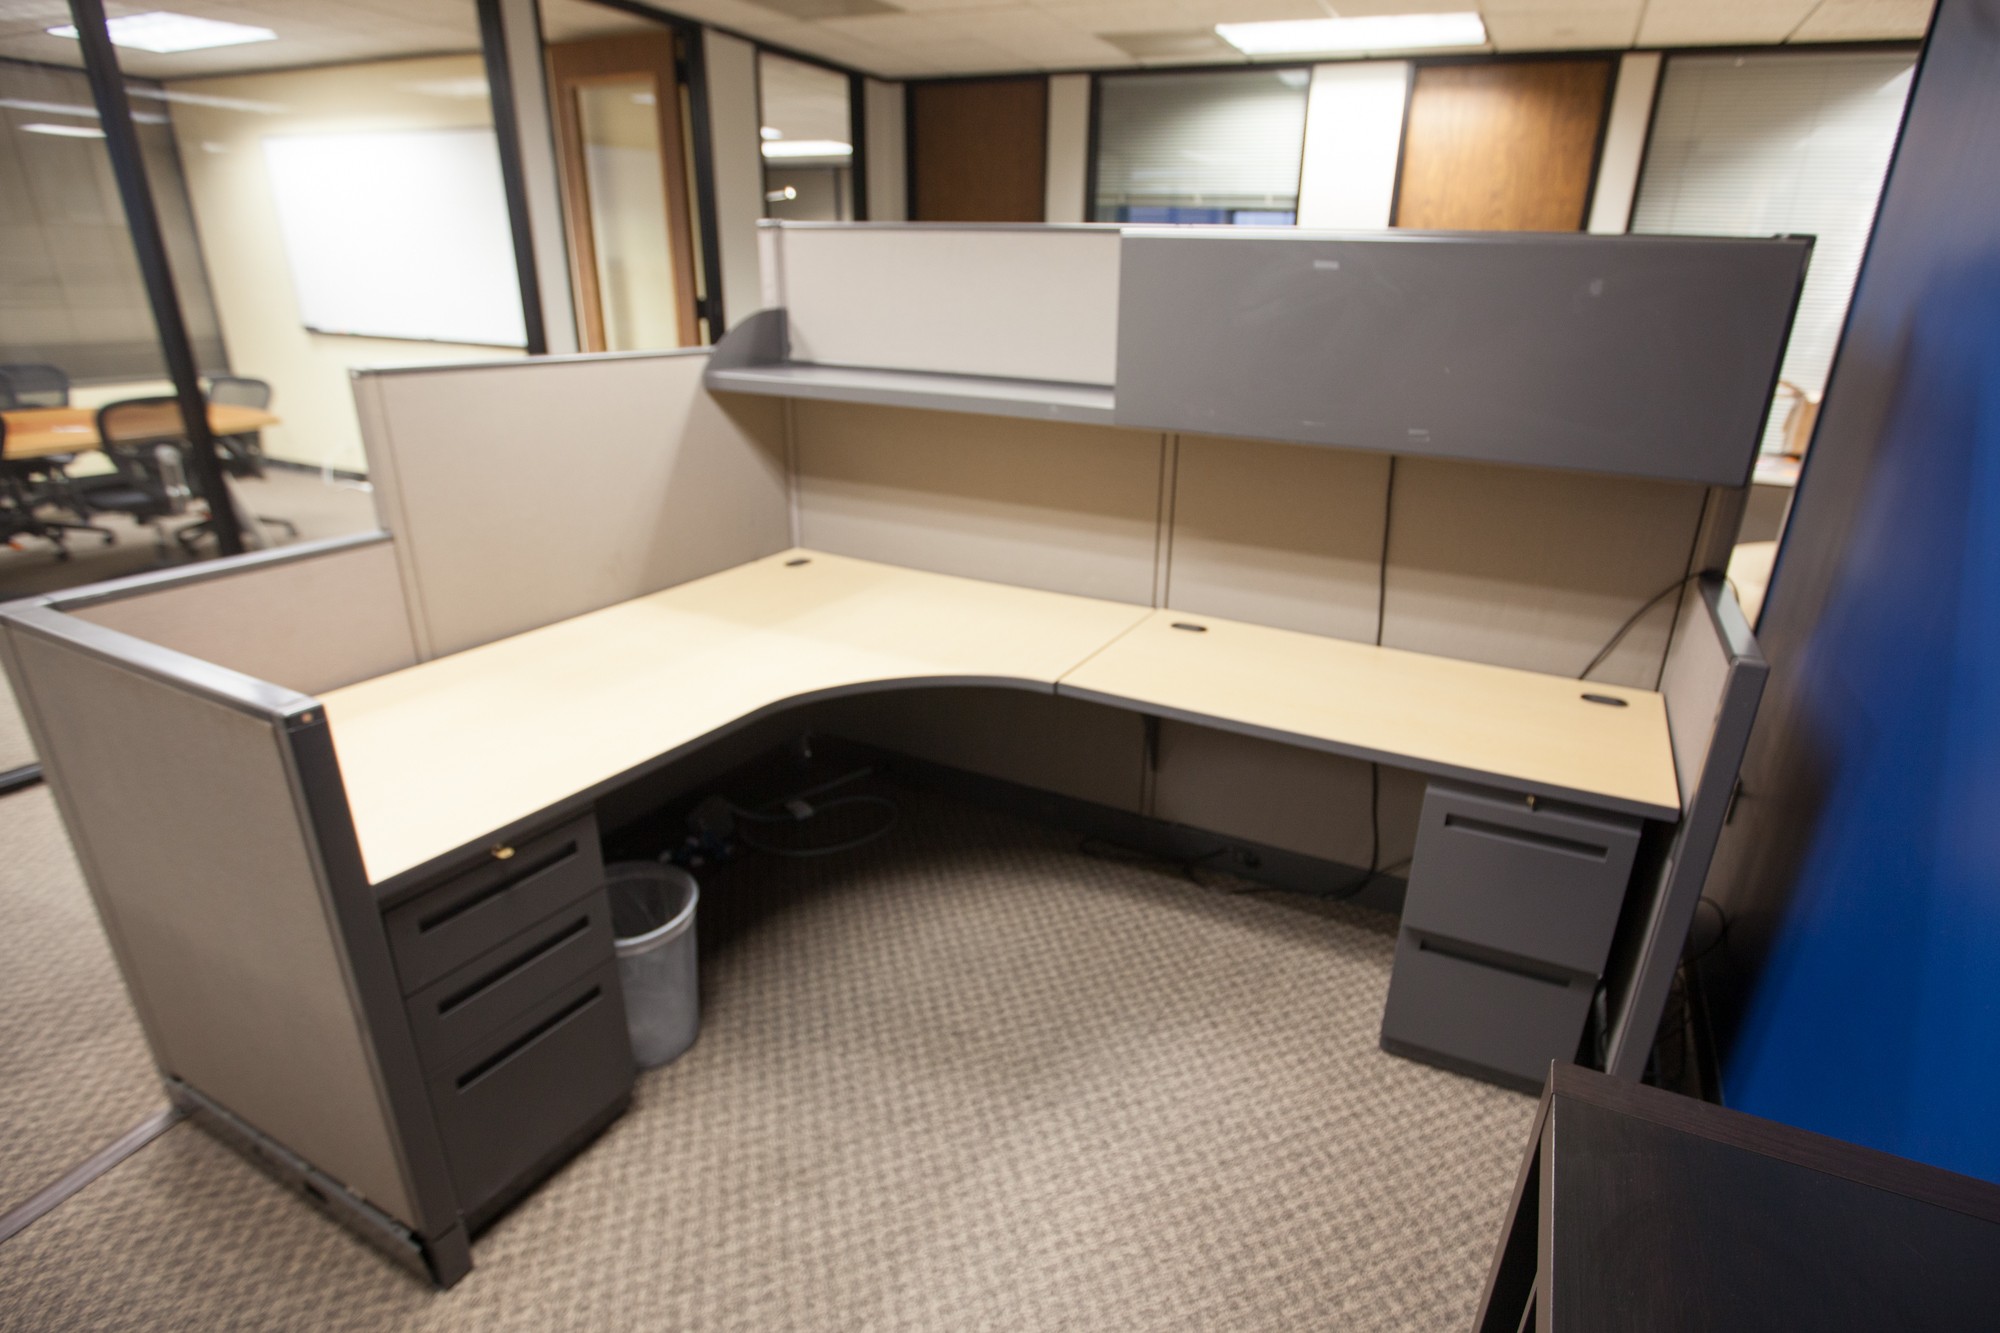 Steelcase Cubicles for Offices-1196